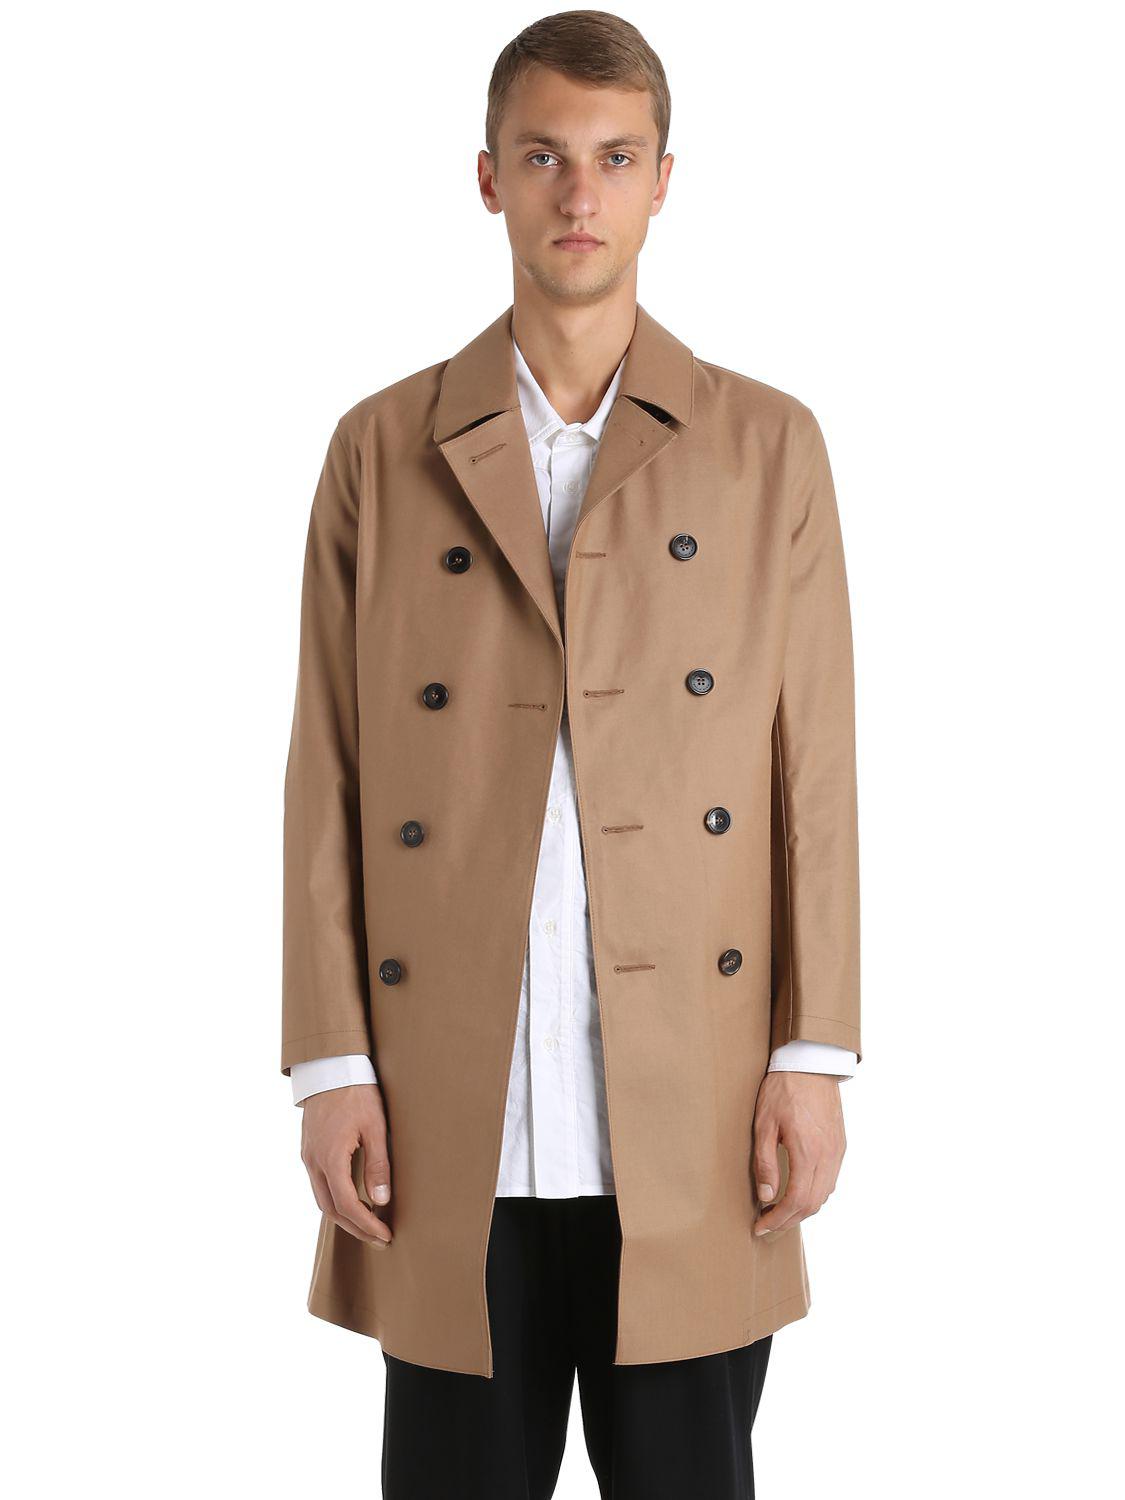 Mackintosh Rubberized Wool Coat In Beige Natural For Men Save